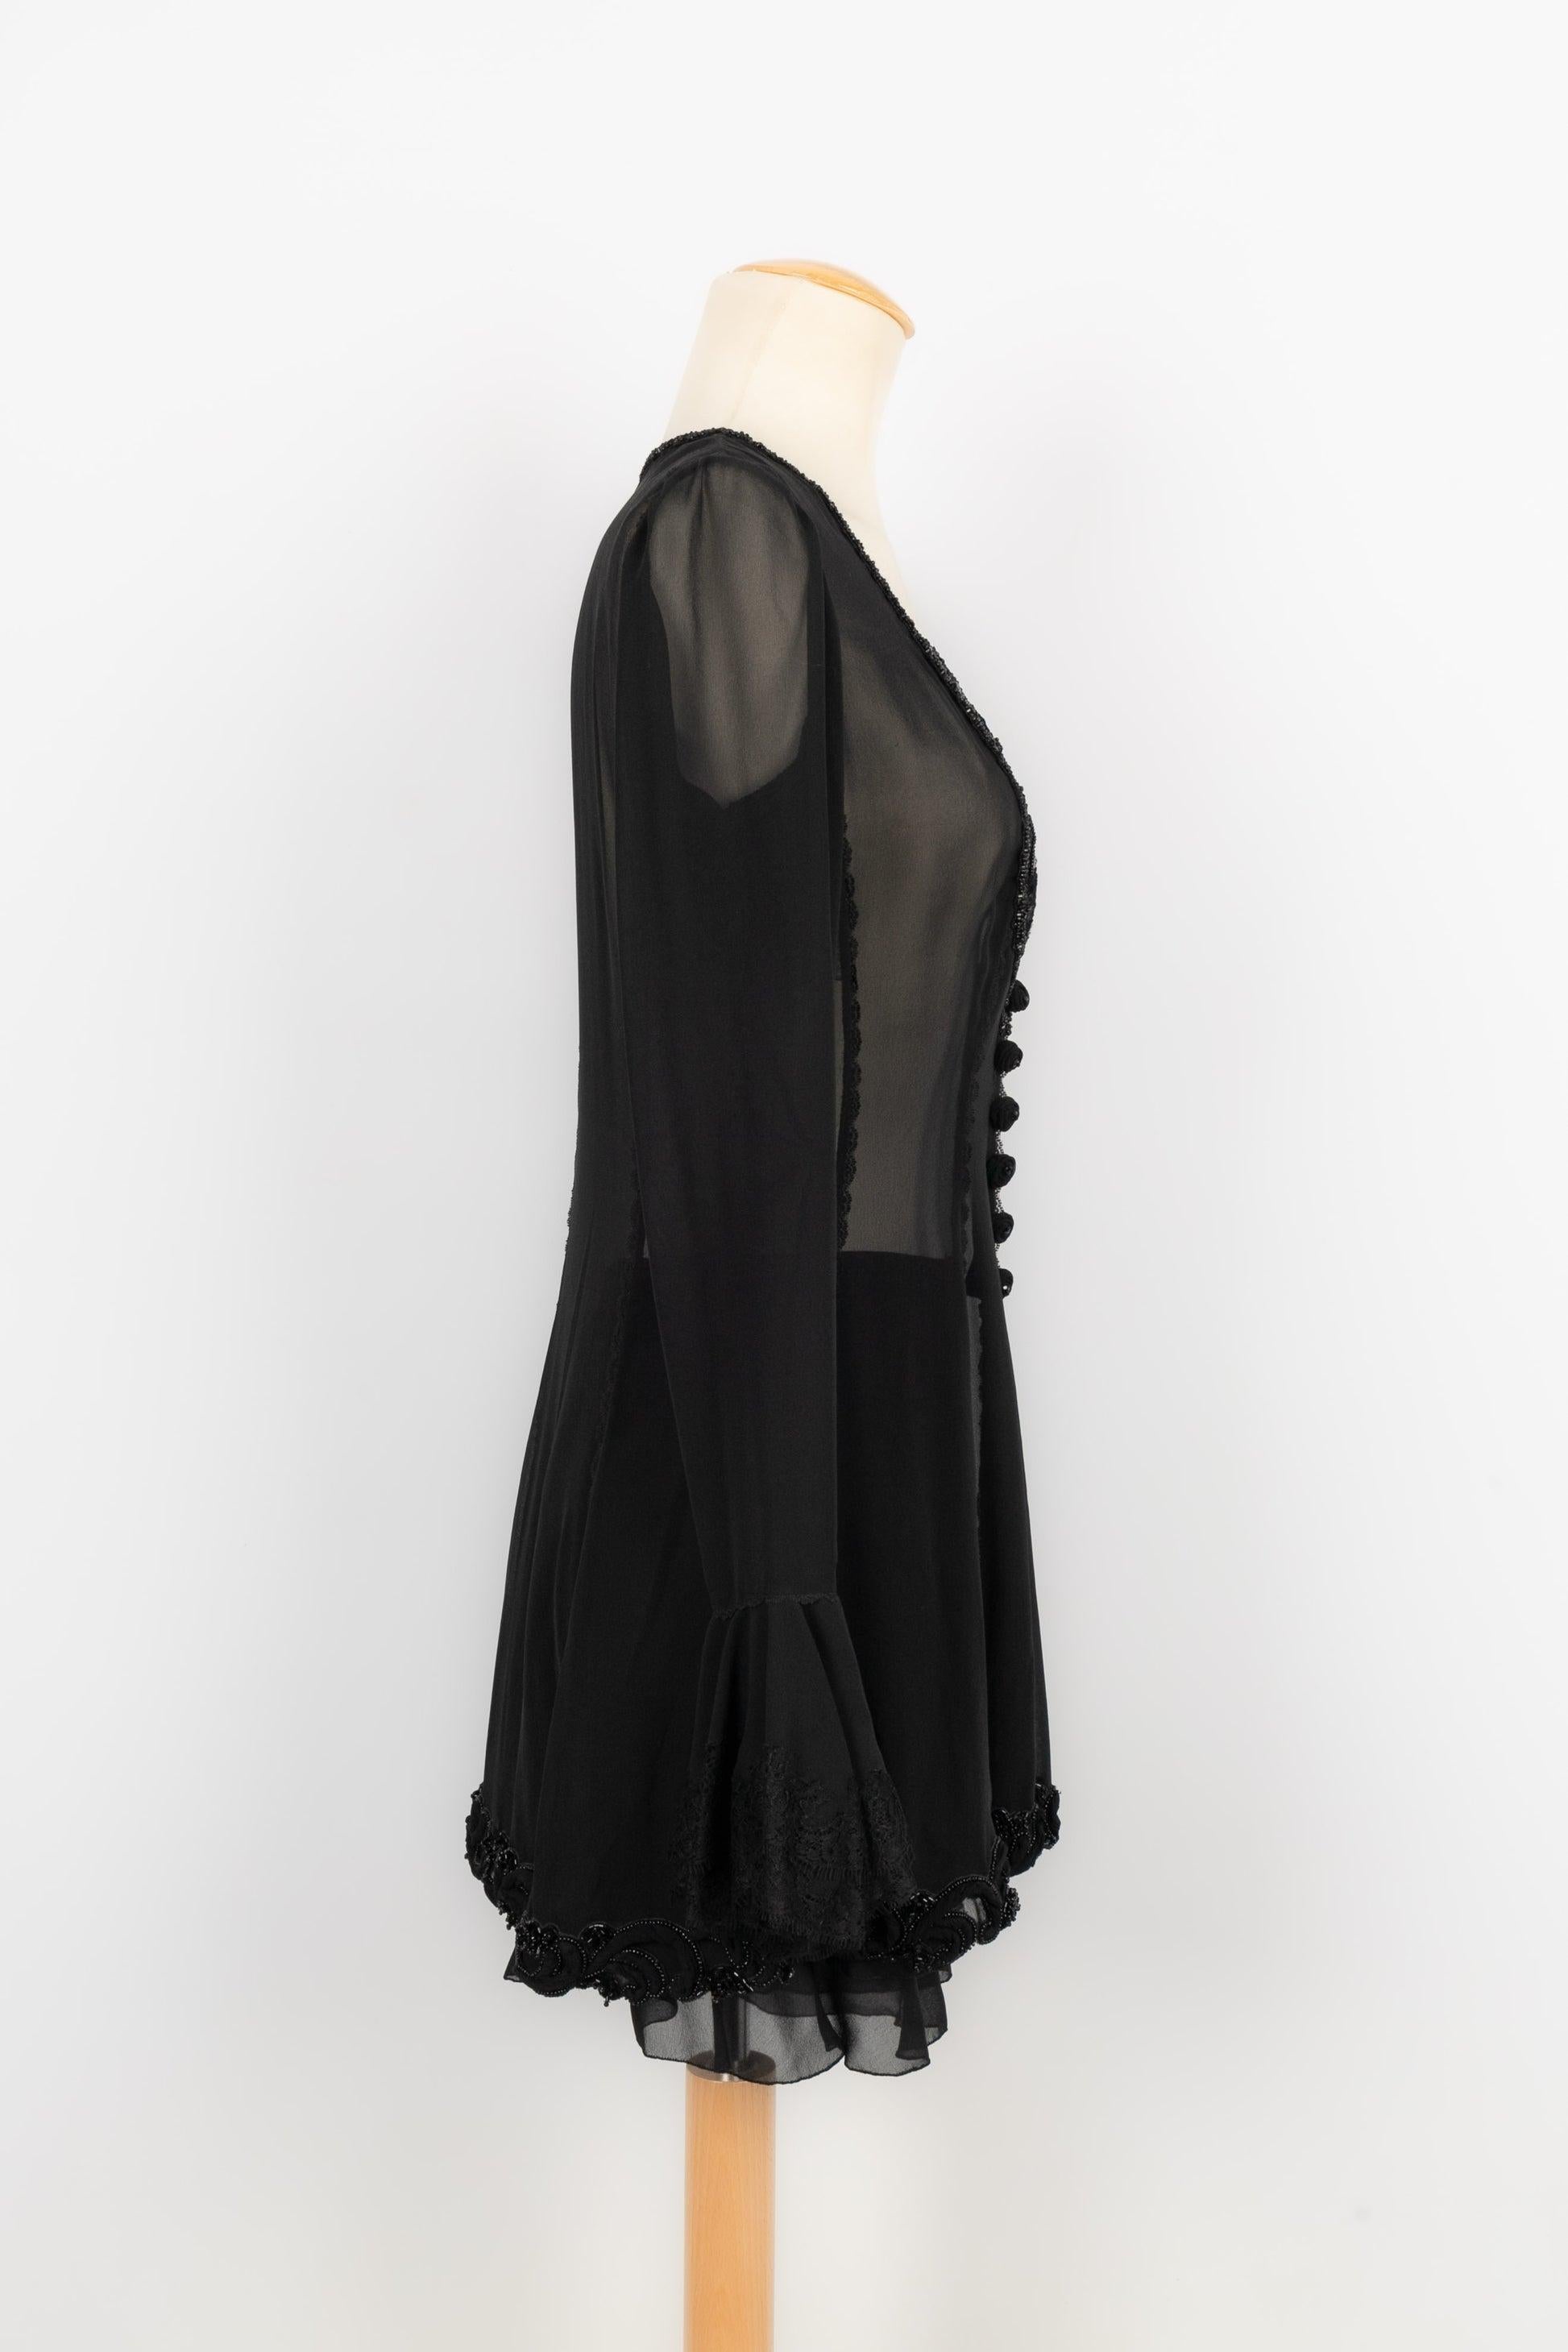 Ungaro Haute Couture Silk Crepe Set Embroidered with Black Pearls, 1990s In Excellent Condition For Sale In SAINT-OUEN-SUR-SEINE, FR